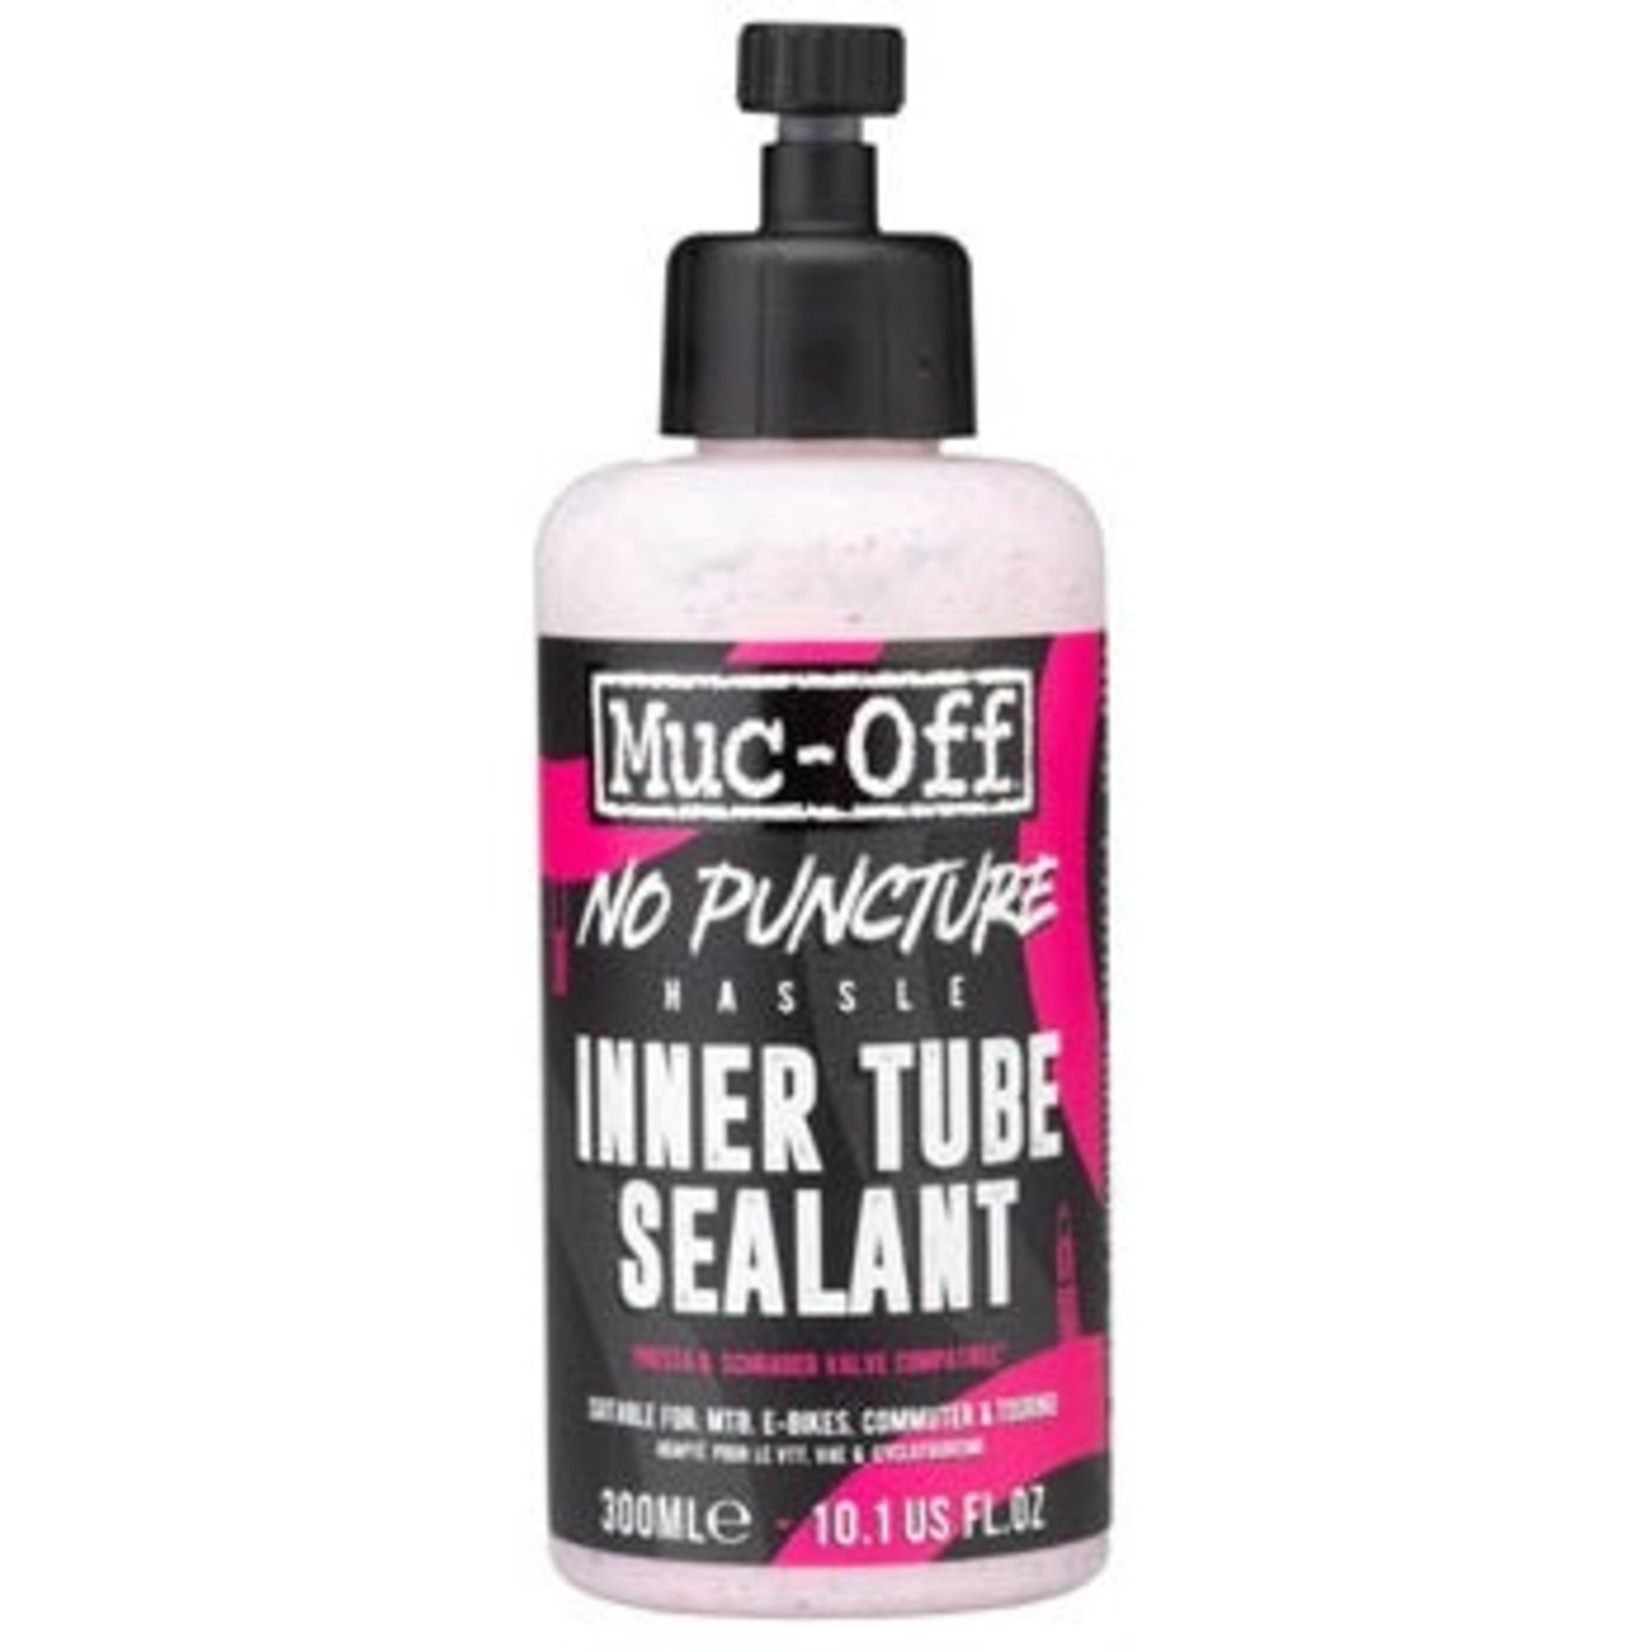 Muc-Off Muc-Off No Puncture Hassle Inner Tube Sealant - 300ml Bottle